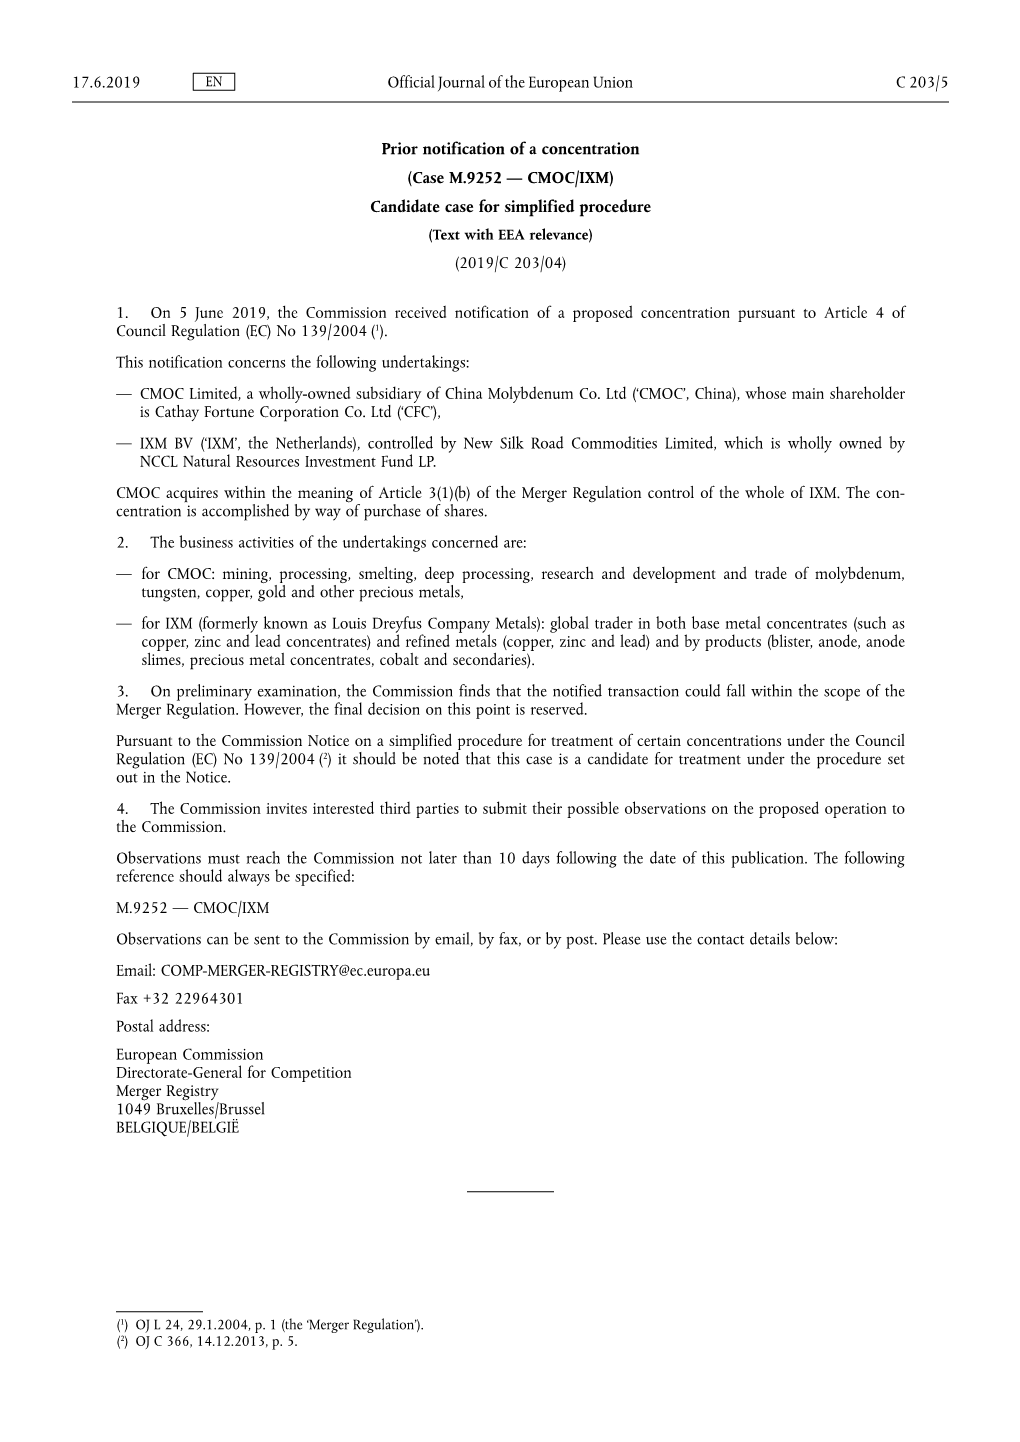 Prior Notification of a Concentration (Case M.9252 — CMOC/IXM) Candidate Case for Simplified Procedure (Text with EEA Relevance) (2019/C 203/04)